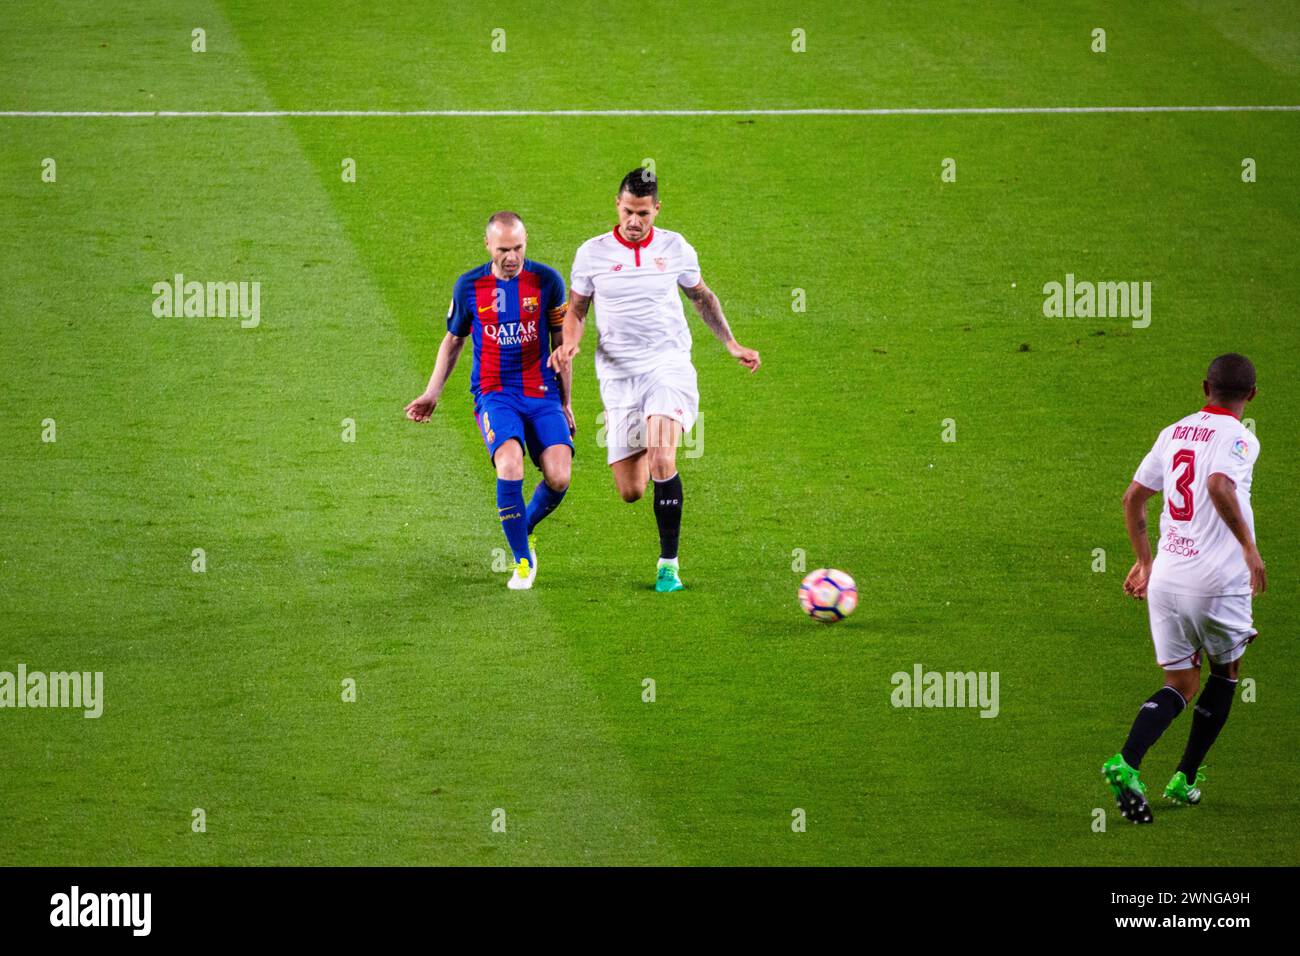 INIESTA, BARCELONA FC, 2017: Andrés Iniesta challenges Vitolo for the ball. Barcelona FC v Sevilla FC at Camp Nou, Barcelona on 5 April 2017. Photo: Rob Watkins. Barca won the game 3-0 with three goals in the first 33 minutes. The game was played in a deluge of rain during a massive spring storm. Stock Photo